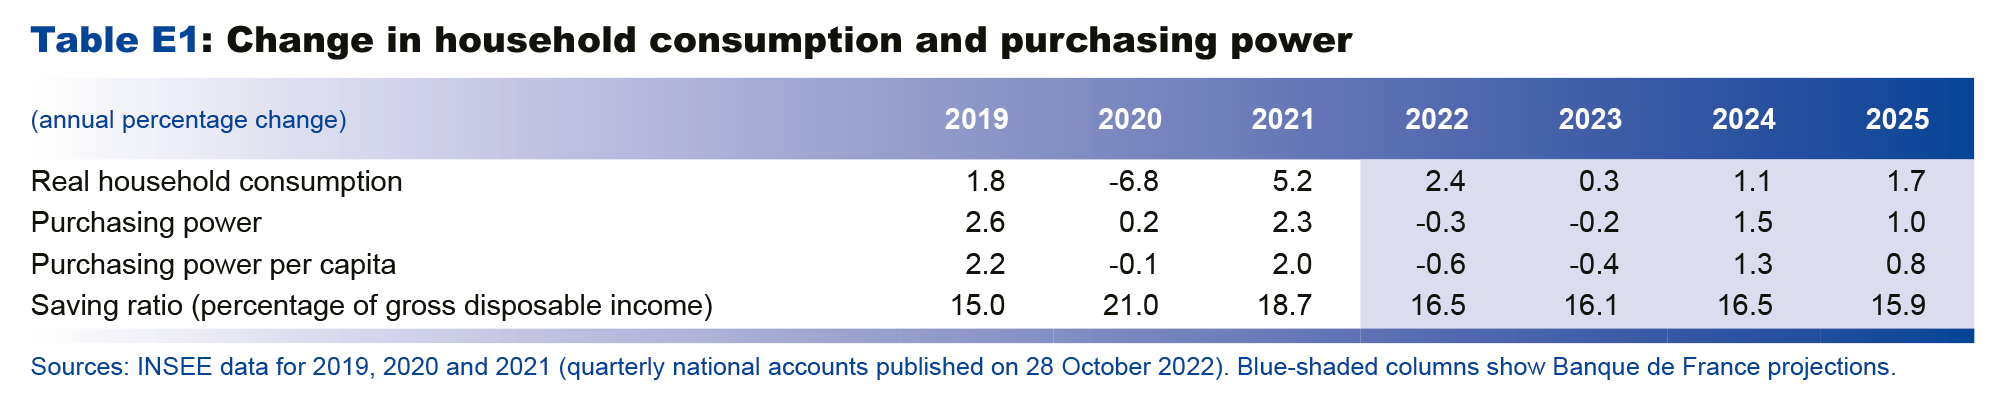 Macroeconomic projections – December 2022 - Change in household conumption and purchasing power